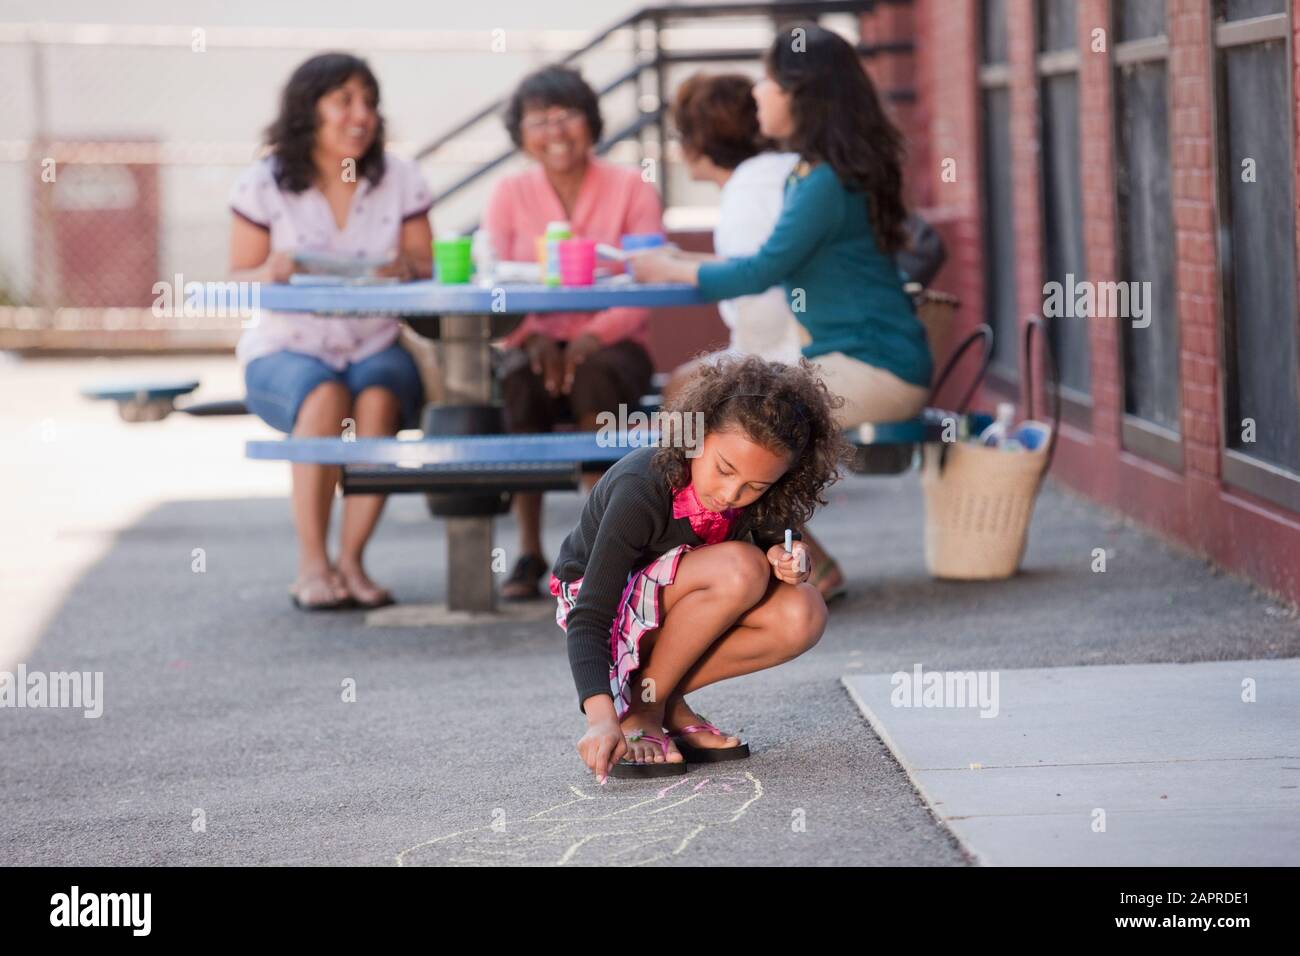 A girl crouches on the sidewalk and draws hopscotch game with chalk with three women sitting and talking behind her Stock Photo